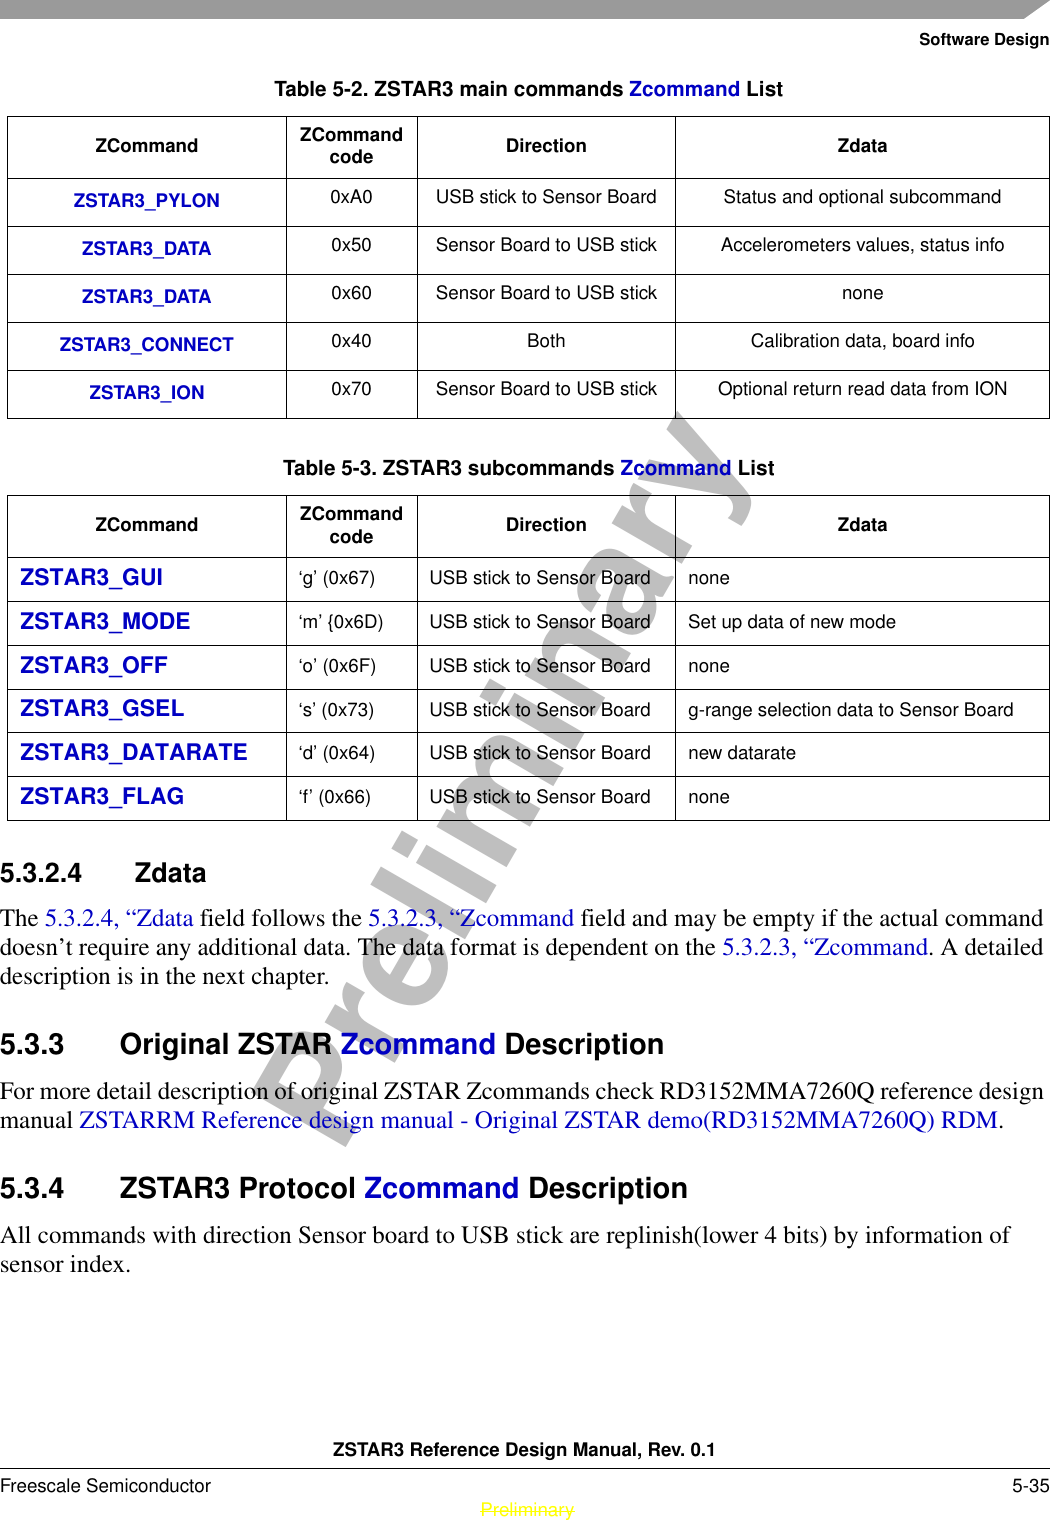 Software DesignZSTAR3 Reference Design Manual, Rev. 0.1Freescale Semiconductor 5-35 PreliminaryPreliminary5.3.2.4 ZdataThe 5.3.2.4, “Zdata field follows the 5.3.2.3, “Zcommand field and may be empty if the actual command doesn’t require any additional data. The data format is dependent on the 5.3.2.3, “Zcommand. A detailed description is in the next chapter.5.3.3 Original ZSTAR Zcommand DescriptionFor more detail description of original ZSTAR Zcommands check RD3152MMA7260Q reference design manual ZSTARRM Reference design manual - Original ZSTAR demo(RD3152MMA7260Q) RDM. 5.3.4 ZSTAR3 Protocol Zcommand DescriptionAll commands with direction Sensor board to USB stick are replinish(lower 4 bits) by information of sensor index.Table 5-2. ZSTAR3 main commands Zcommand ListZCommand ZCommand code Direction ZdataZSTAR3_PYLON 0xA0 USB stick to Sensor Board Status and optional subcommandZSTAR3_DATA 0x50 Sensor Board to USB stick Accelerometers values, status infoZSTAR3_DATA 0x60 Sensor Board to USB stick noneZSTAR3_CONNECT 0x40 Both Calibration data, board infoZSTAR3_ION 0x70 Sensor Board to USB stick Optional return read data from IONTable 5-3. ZSTAR3 subcommands Zcommand ListZCommand ZCommand code Direction ZdataZSTAR3_GUI ‘g’ (0x67) USB stick to Sensor Board noneZSTAR3_MODE ‘m’ {0x6D) USB stick to Sensor Board Set up data of new modeZSTAR3_OFF ‘o’ (0x6F) USB stick to Sensor Board noneZSTAR3_GSEL ‘s’ (0x73) USB stick to Sensor Board g-range selection data to Sensor BoardZSTAR3_DATARATE ‘d’ (0x64) USB stick to Sensor Board new datarateZSTAR3_FLAG ‘f’ (0x66) USB stick to Sensor Board none